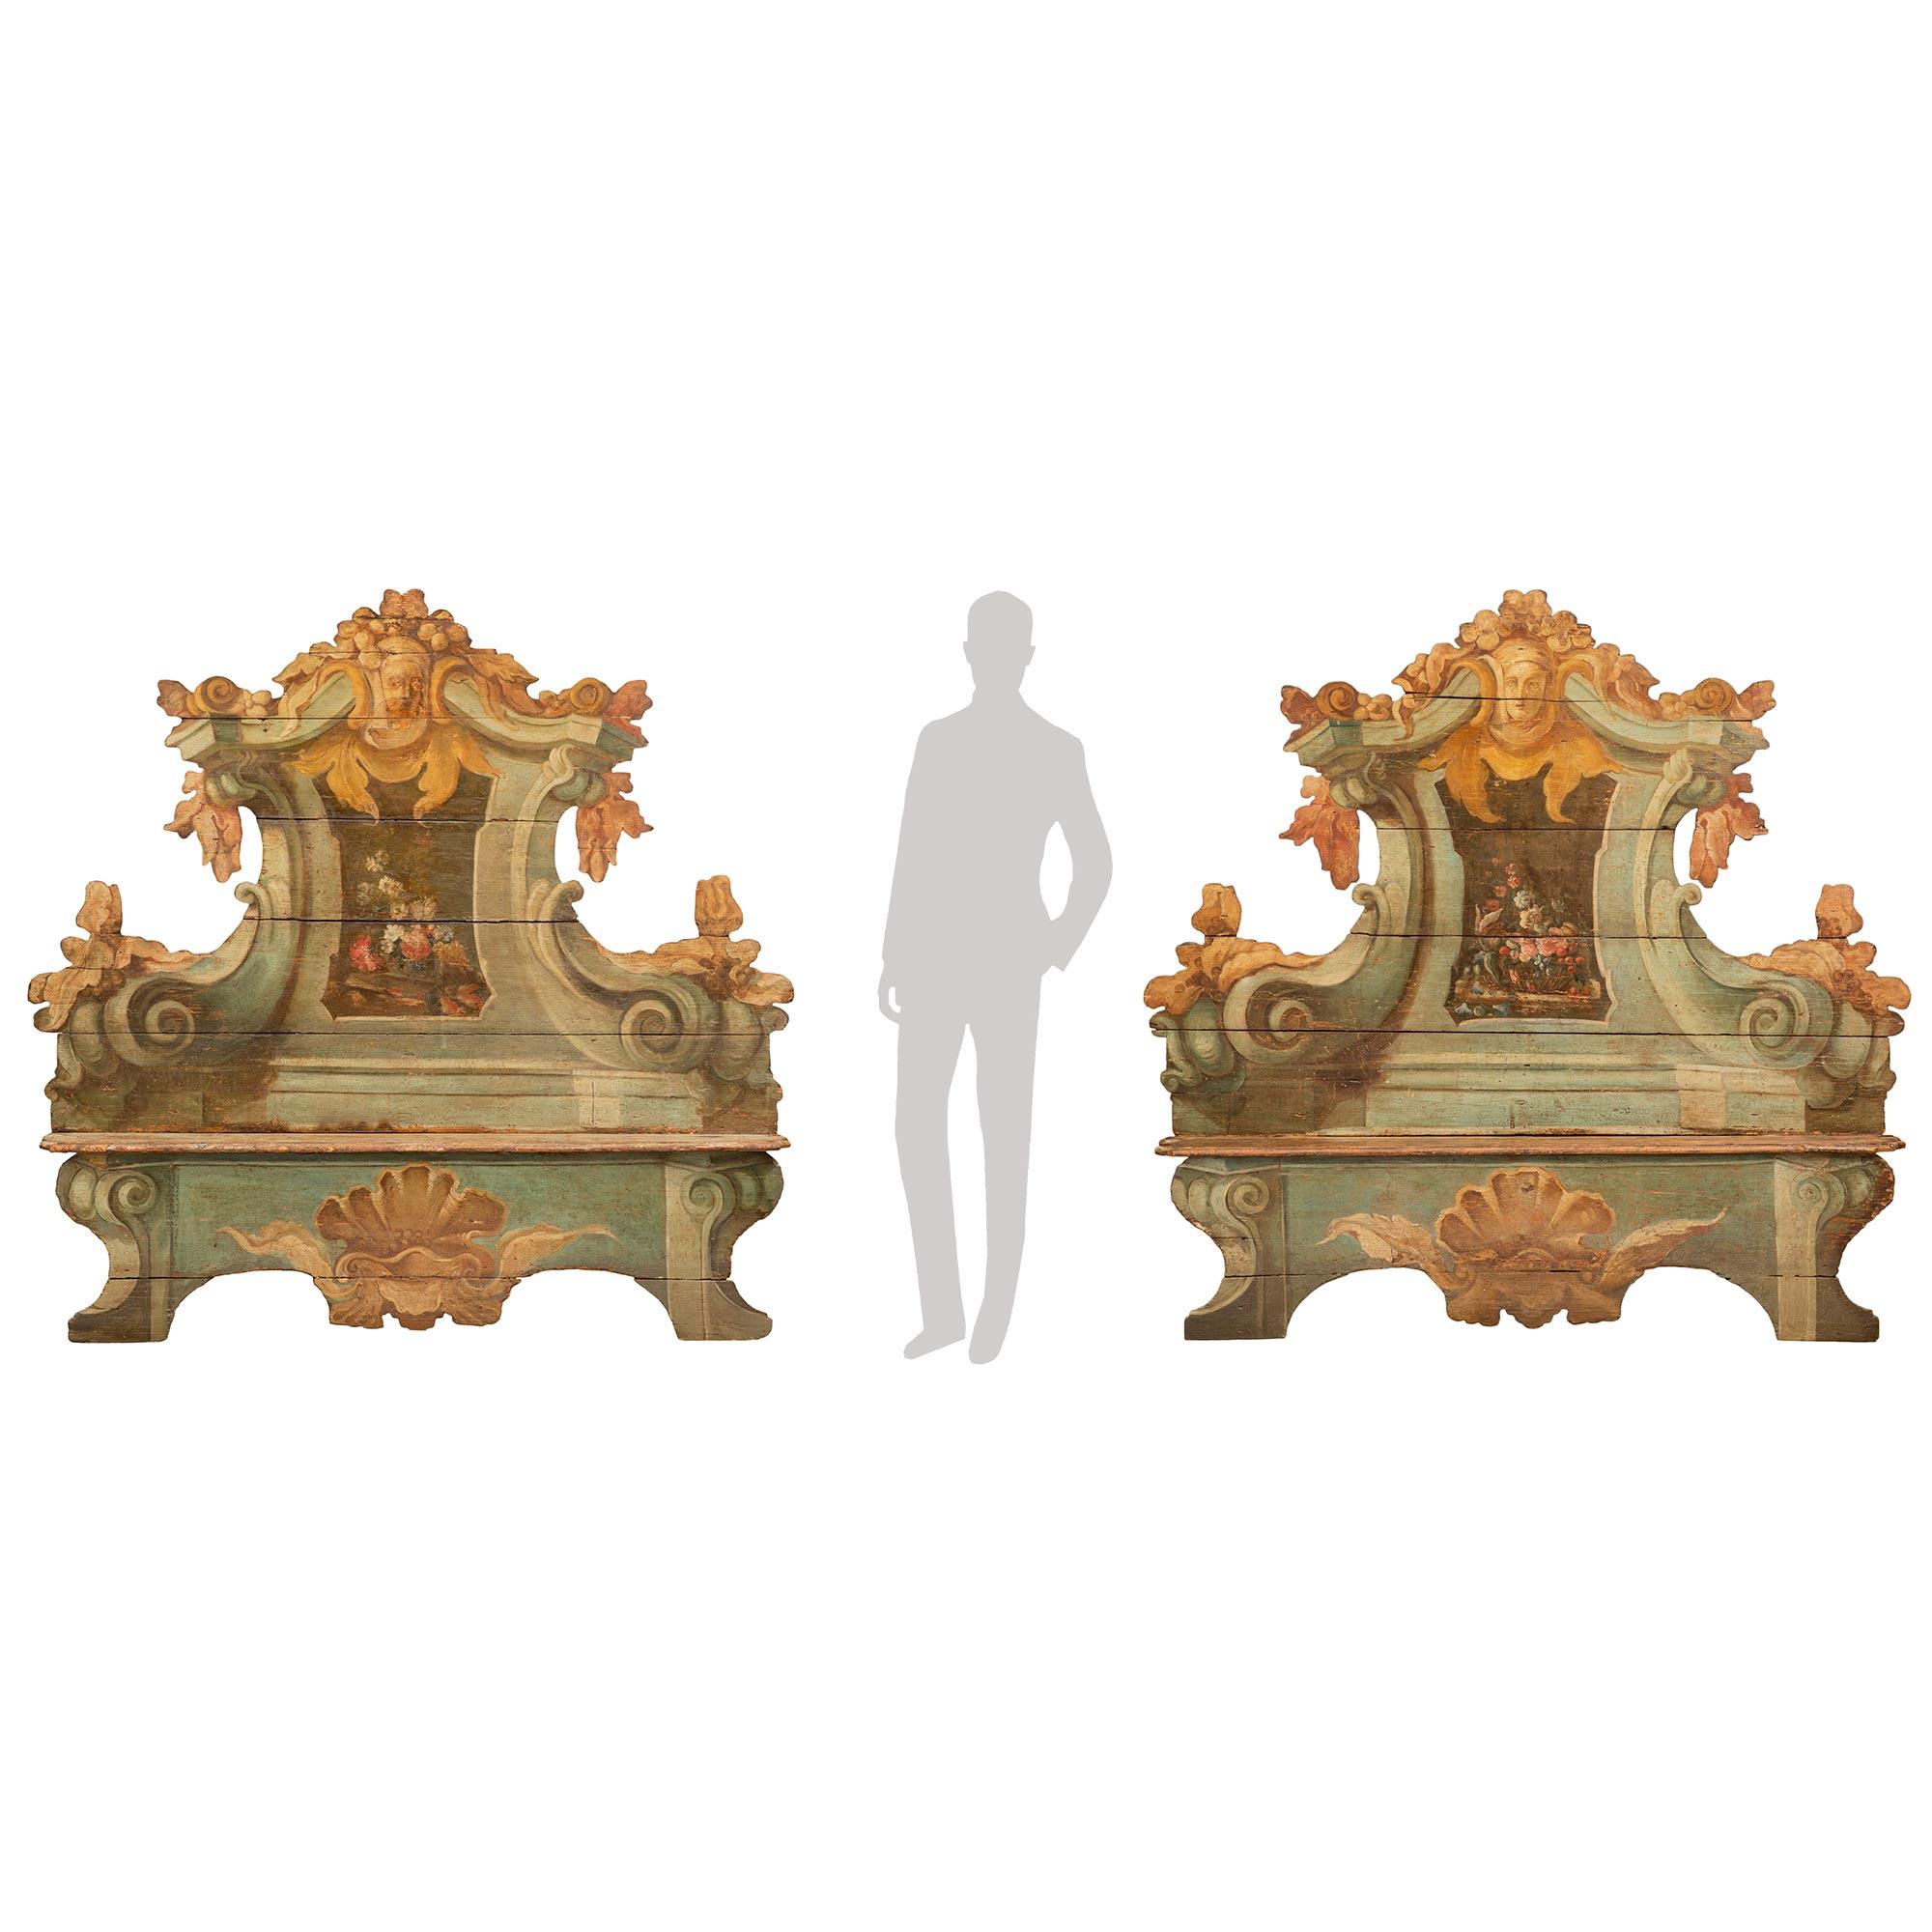 A sensational and large scale pair of Italian 18th century Baroque Cassapanca polychrome benches. Each beautiful and statement making bench is raised by elegant curved supports with striking hand painted scrolled designs and finely detailed central